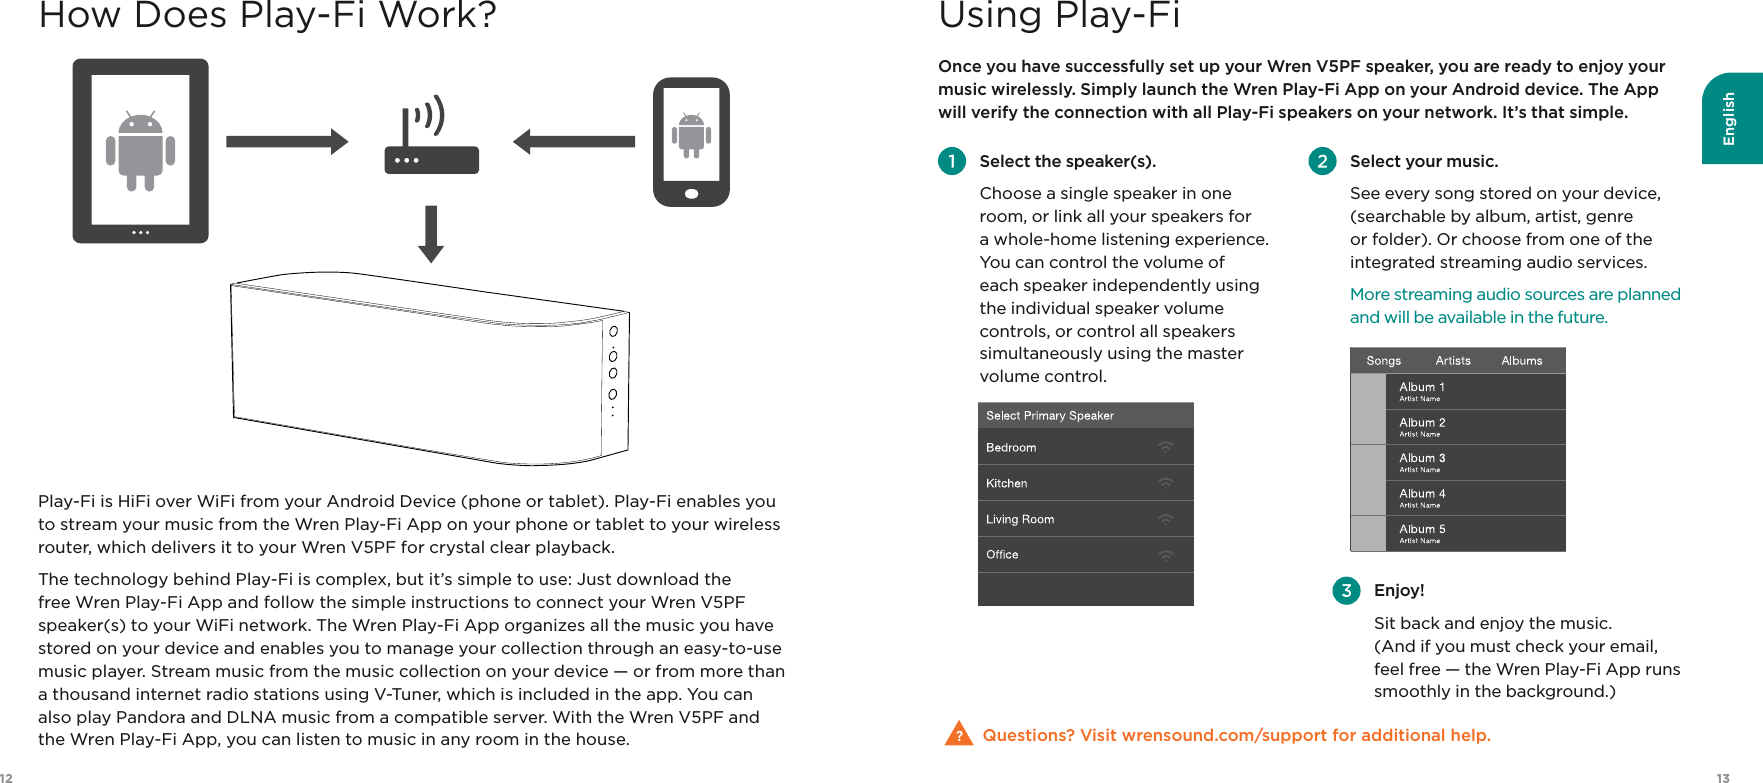 English1312How Does Play-Fi Work? Using Play-FiPlay-Fi is HiFi over WiFi from your Android Device (phone or tablet). Play-Fi enables you to stream your music from the Wren Play-Fi App on your phone or tablet to your wireless router, which delivers it to your Wren V5PF for crystal clear playback. The technology behind Play-Fi is complex, but it’s simple to use: Just download the free Wren Play-Fi App and follow the simple instructions to connect your Wren V5PF speaker(s) to your WiFi network. The Wren Play-Fi App organizes all the music you have stored on your device and enables you to manage your collection through an easy-to-use music player. Stream music from the music collection on your device — or from more than a thousand internet radio stations using V-Tuner, which is included in the app. You can also play Pandora and DLNA music from a compatible server. With the Wren V5PF and the Wren Play-Fi App, you can listen to music in any room in the house. Once you have successfully set up your Wren V5PF speaker, you are ready to enjoy your music wirelessly. Simply launch the Wren Play-Fi App on your Android device. The App will verify the connection with all Play-Fi speakers on your network. It’s that simple.Questions? Visit wrensound.com/support for additional help. Select the speaker(s). Choose a single speaker in one room, or link all your speakers for  a whole-home listening experience. You can control the volume of each speaker independently using the individual speaker volume controls, or control all speakers simultaneously using the master volume control.  Enjoy! Sit back and enjoy the music.  (And if you must check your email,  feel free — the Wren Play-Fi App runs smoothly in the background.) Select your music. See every song stored on your device, (searchable by album, artist, genre or folder). Or choose from one of the integrated streaming audio services. More streaming audio sources are planned and will be available in the future.